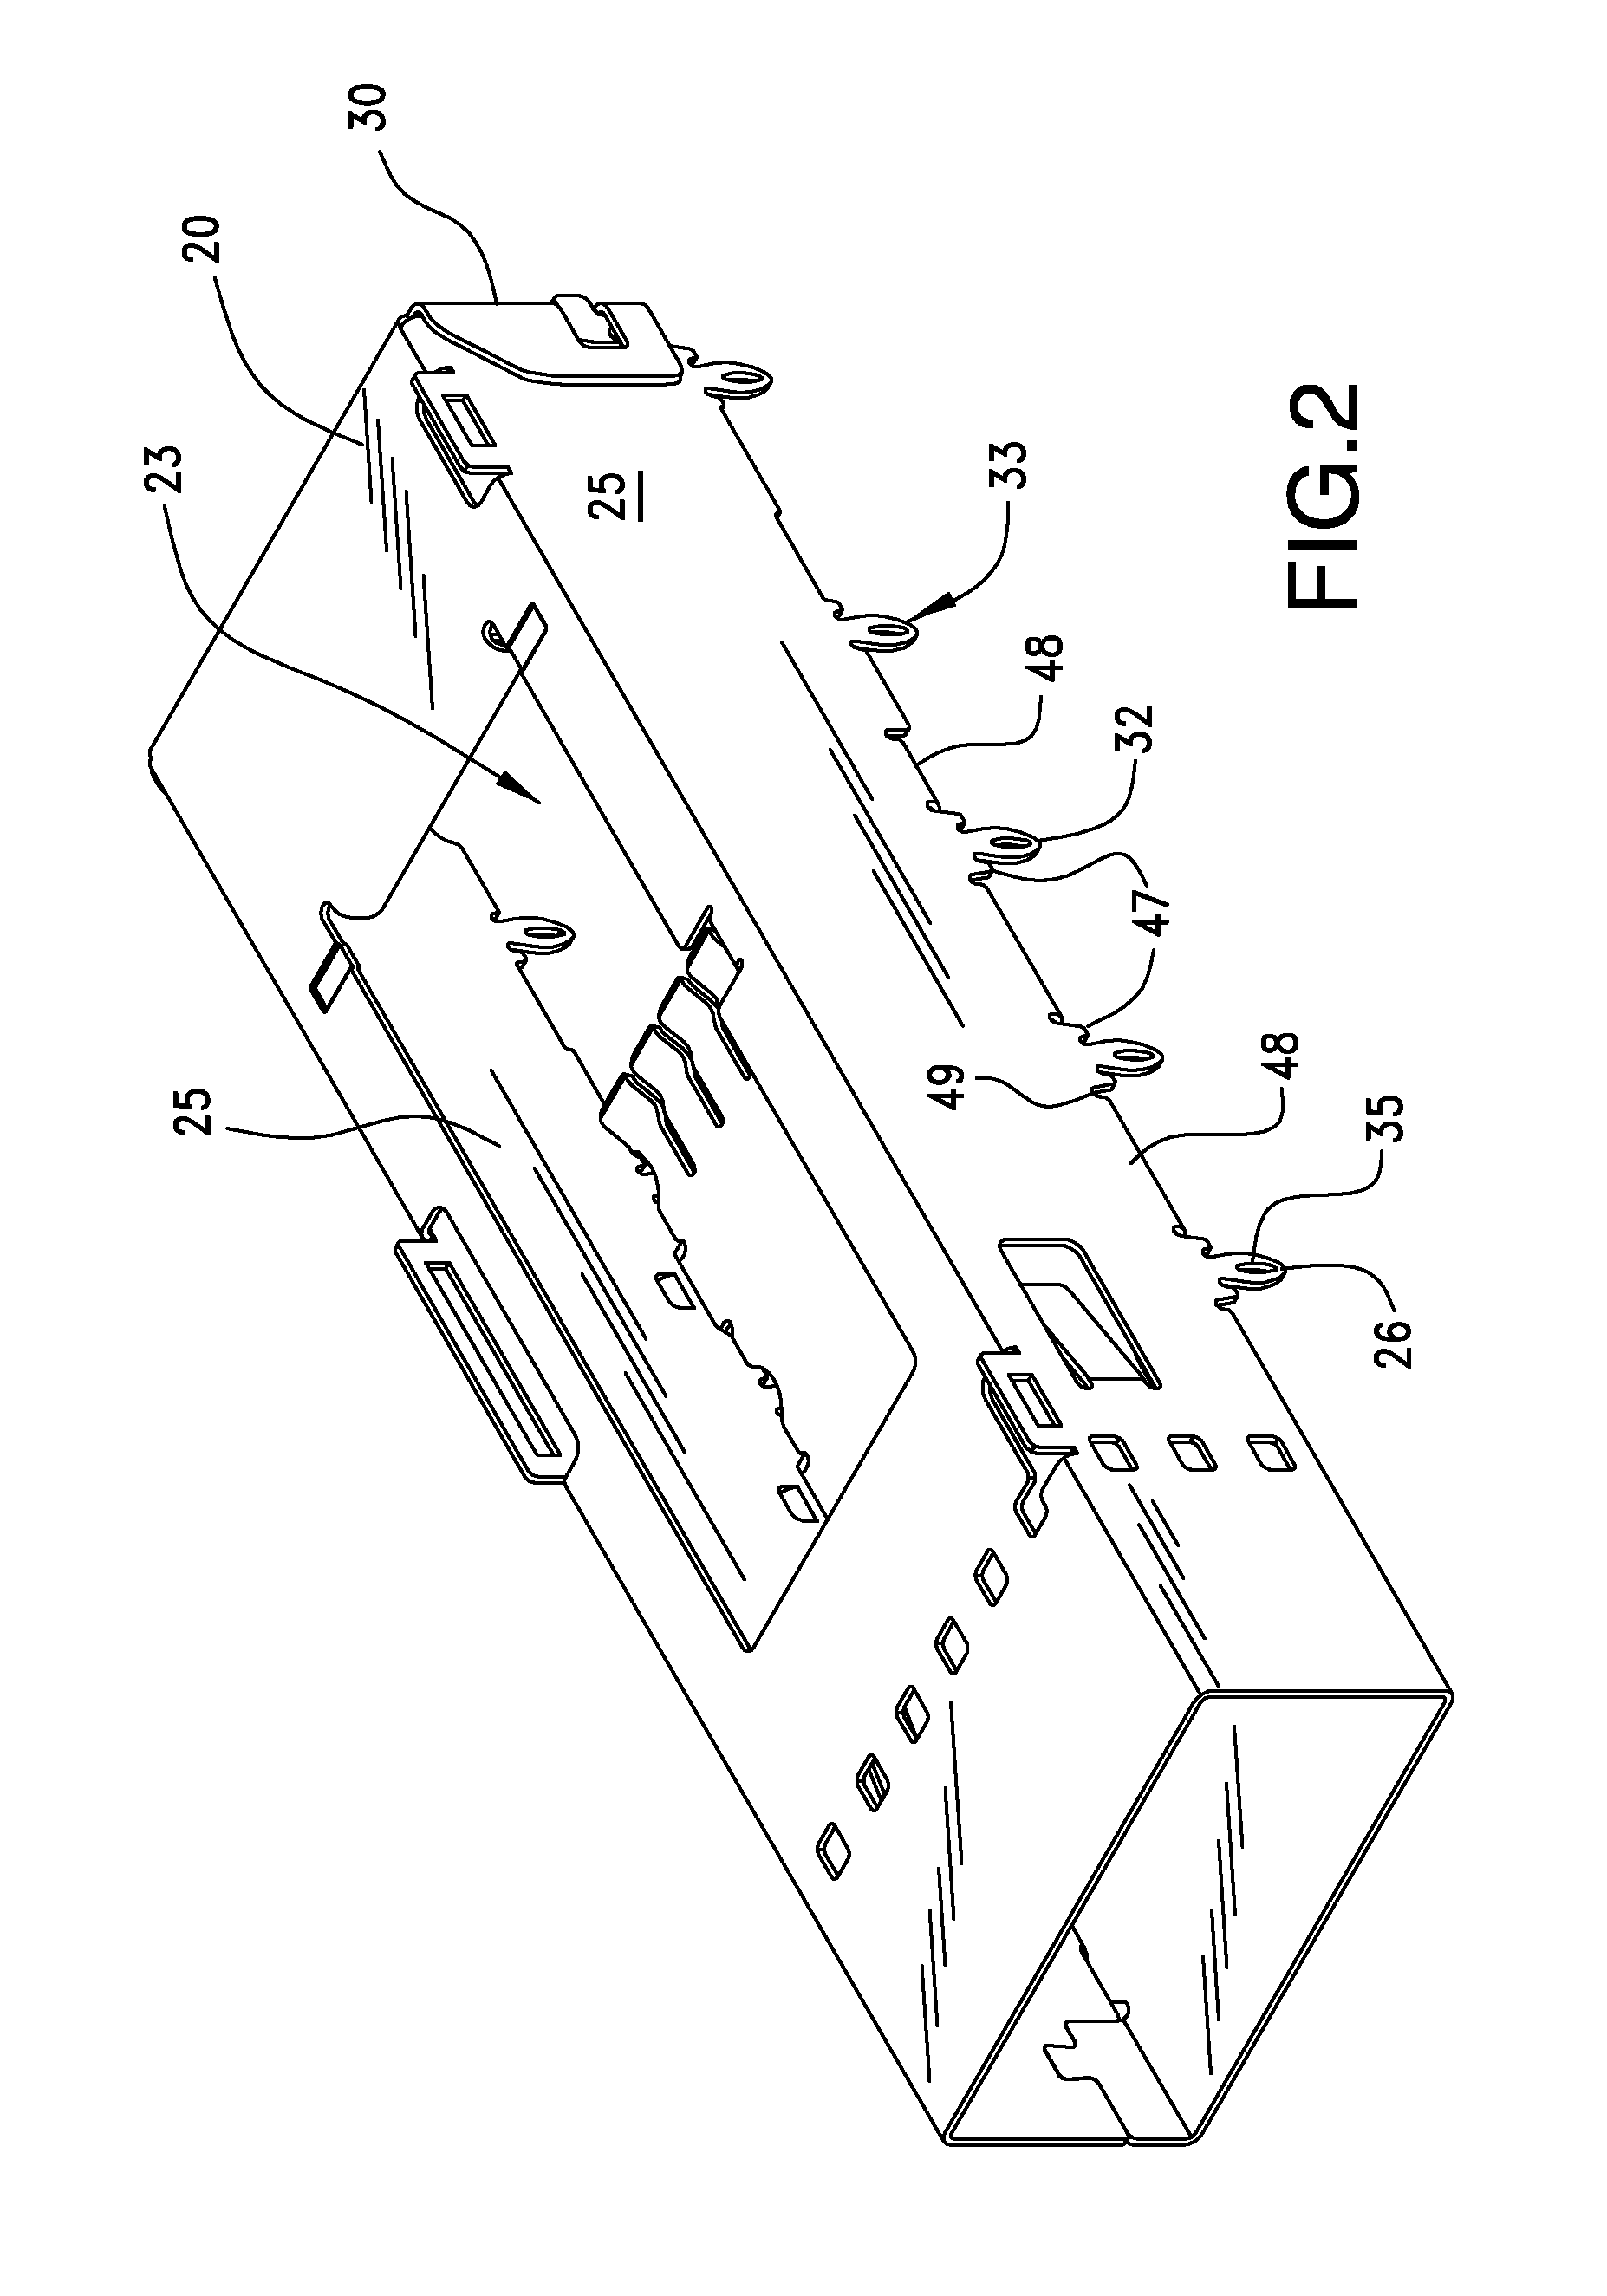 Compliant pin with improved insertion capabilities